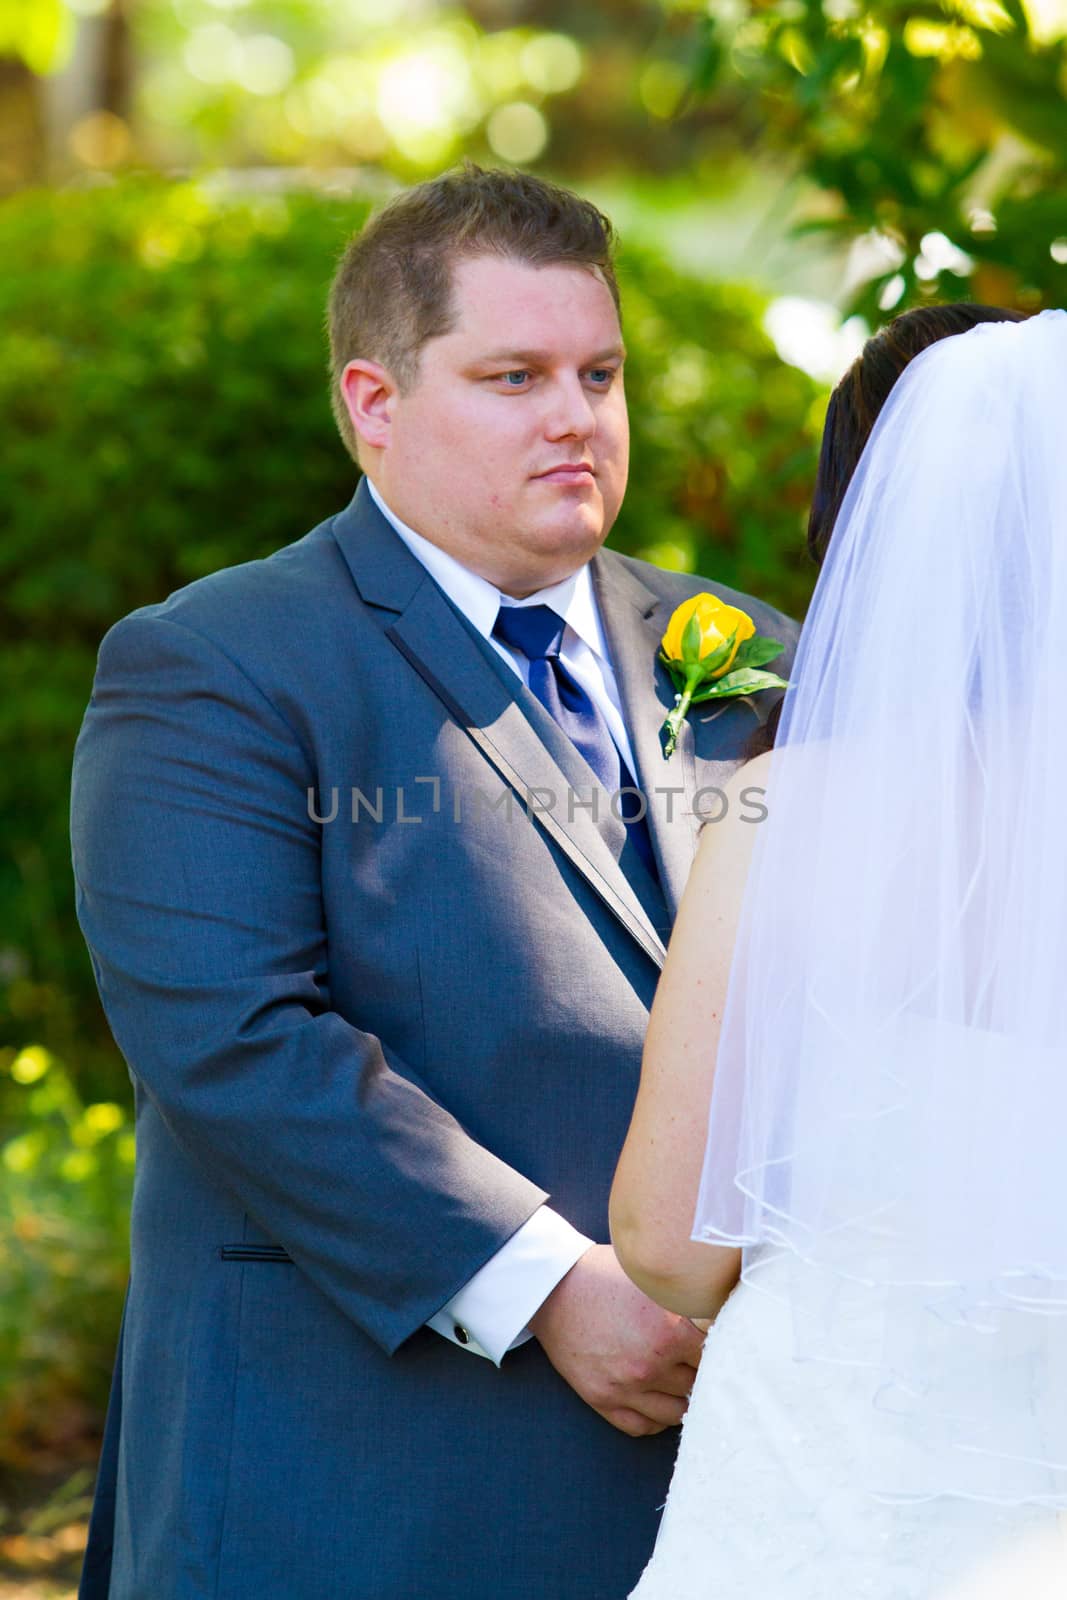 Vertical portrait of a groom during his vows at a ceremony on his wedding day.